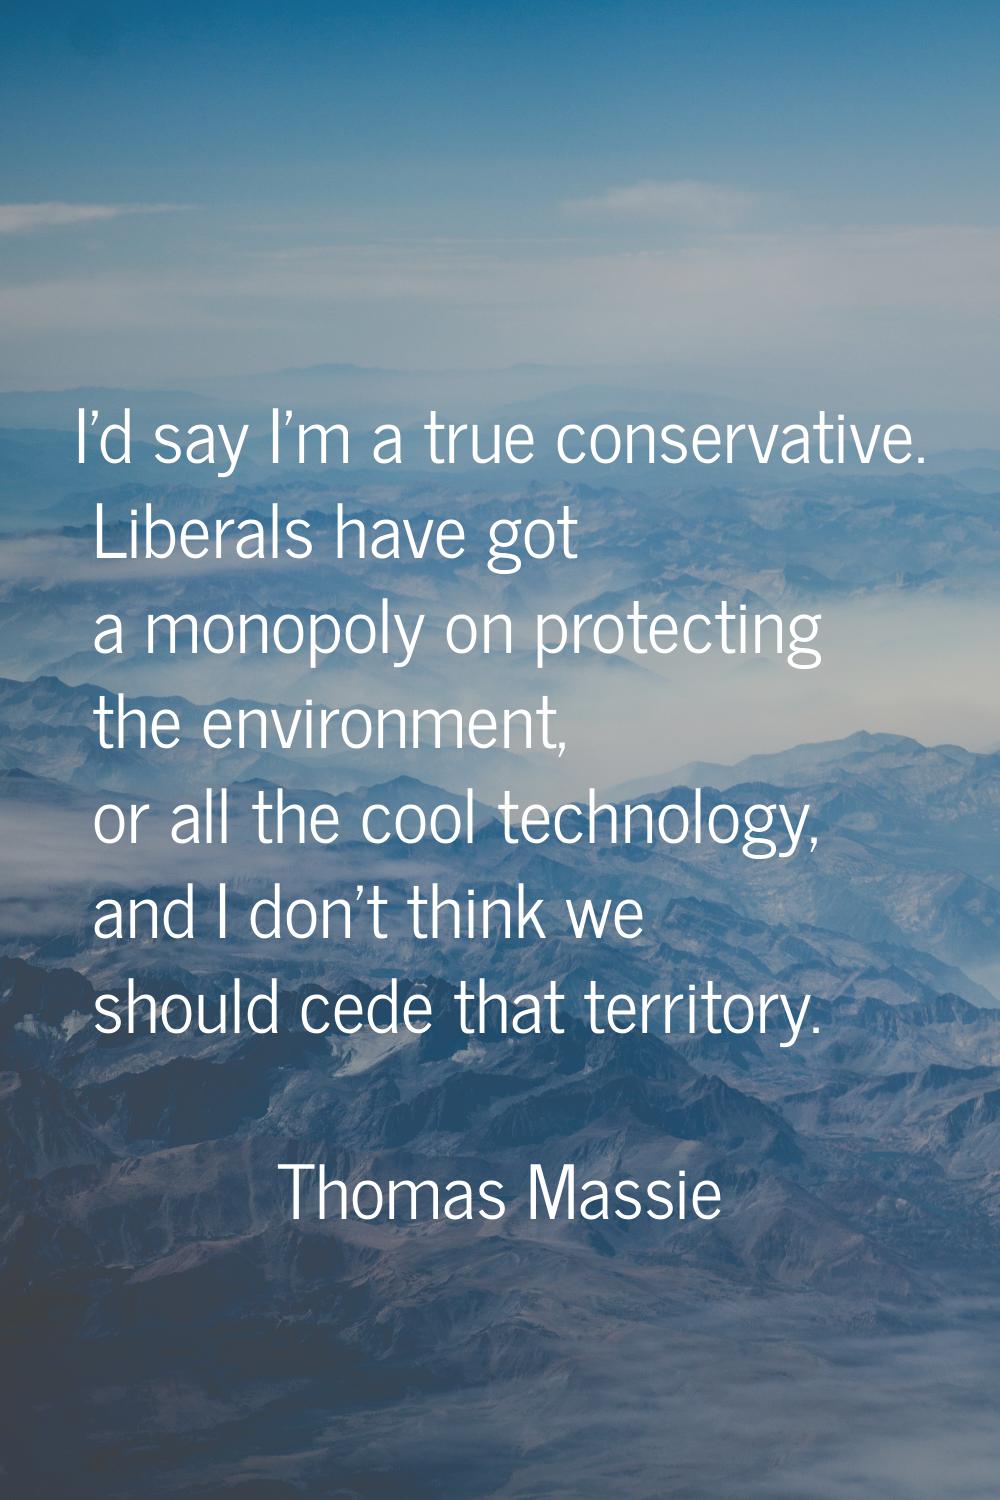 I'd say I'm a true conservative. Liberals have got a monopoly on protecting the environment, or all